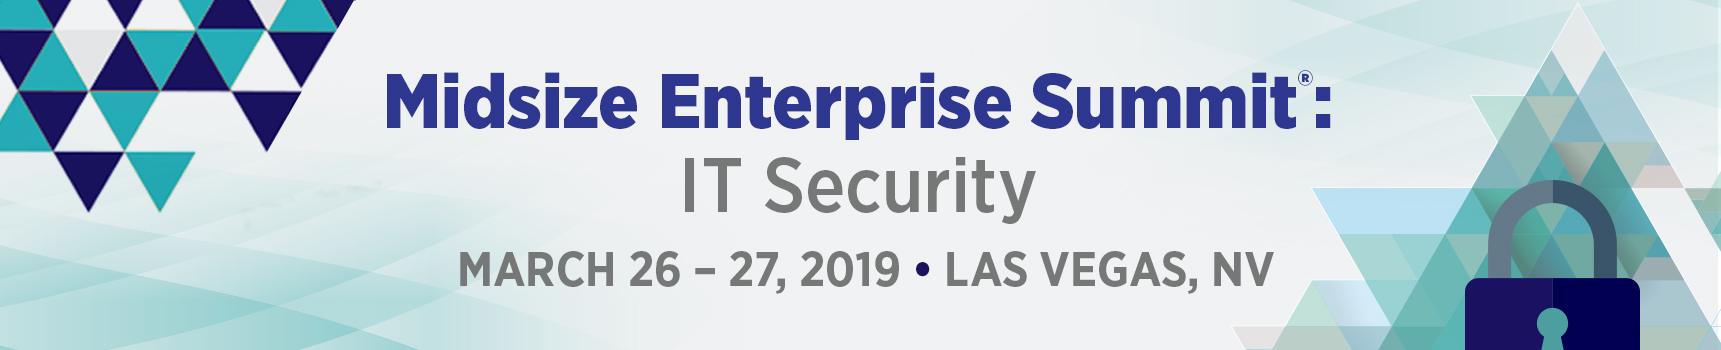 MES IT Security 2019